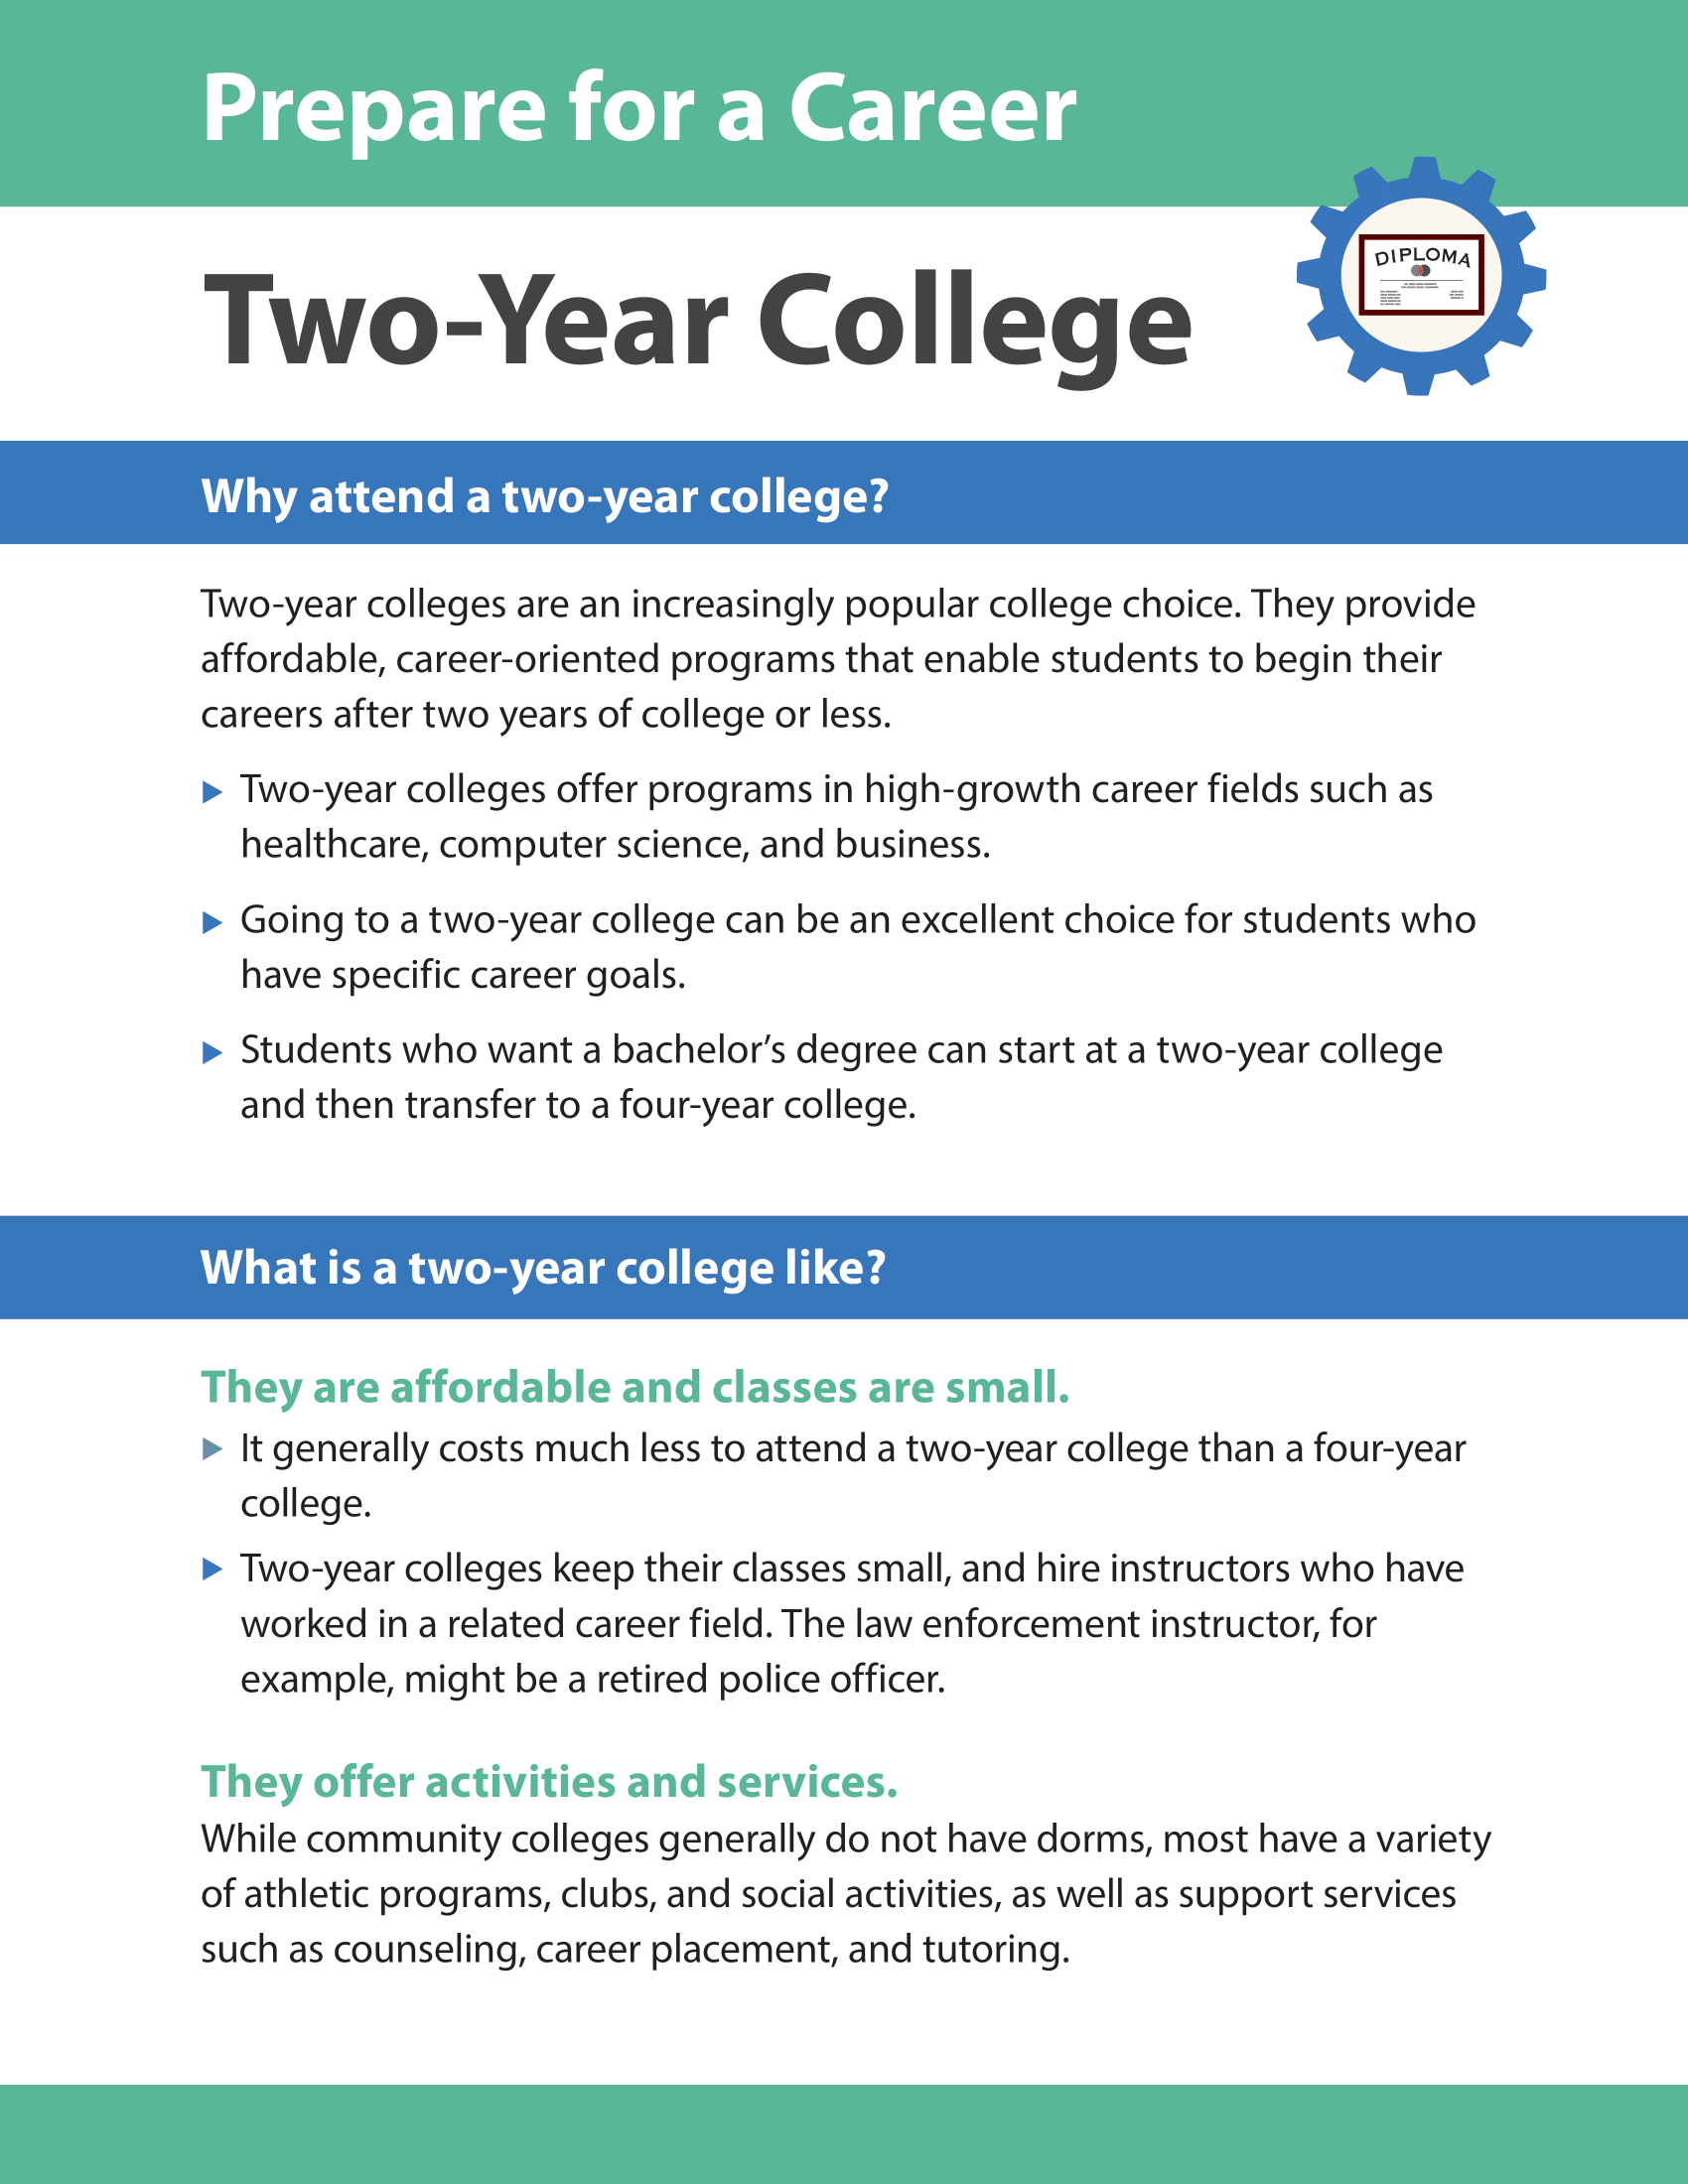 Prepare for a Career - Two-Year College